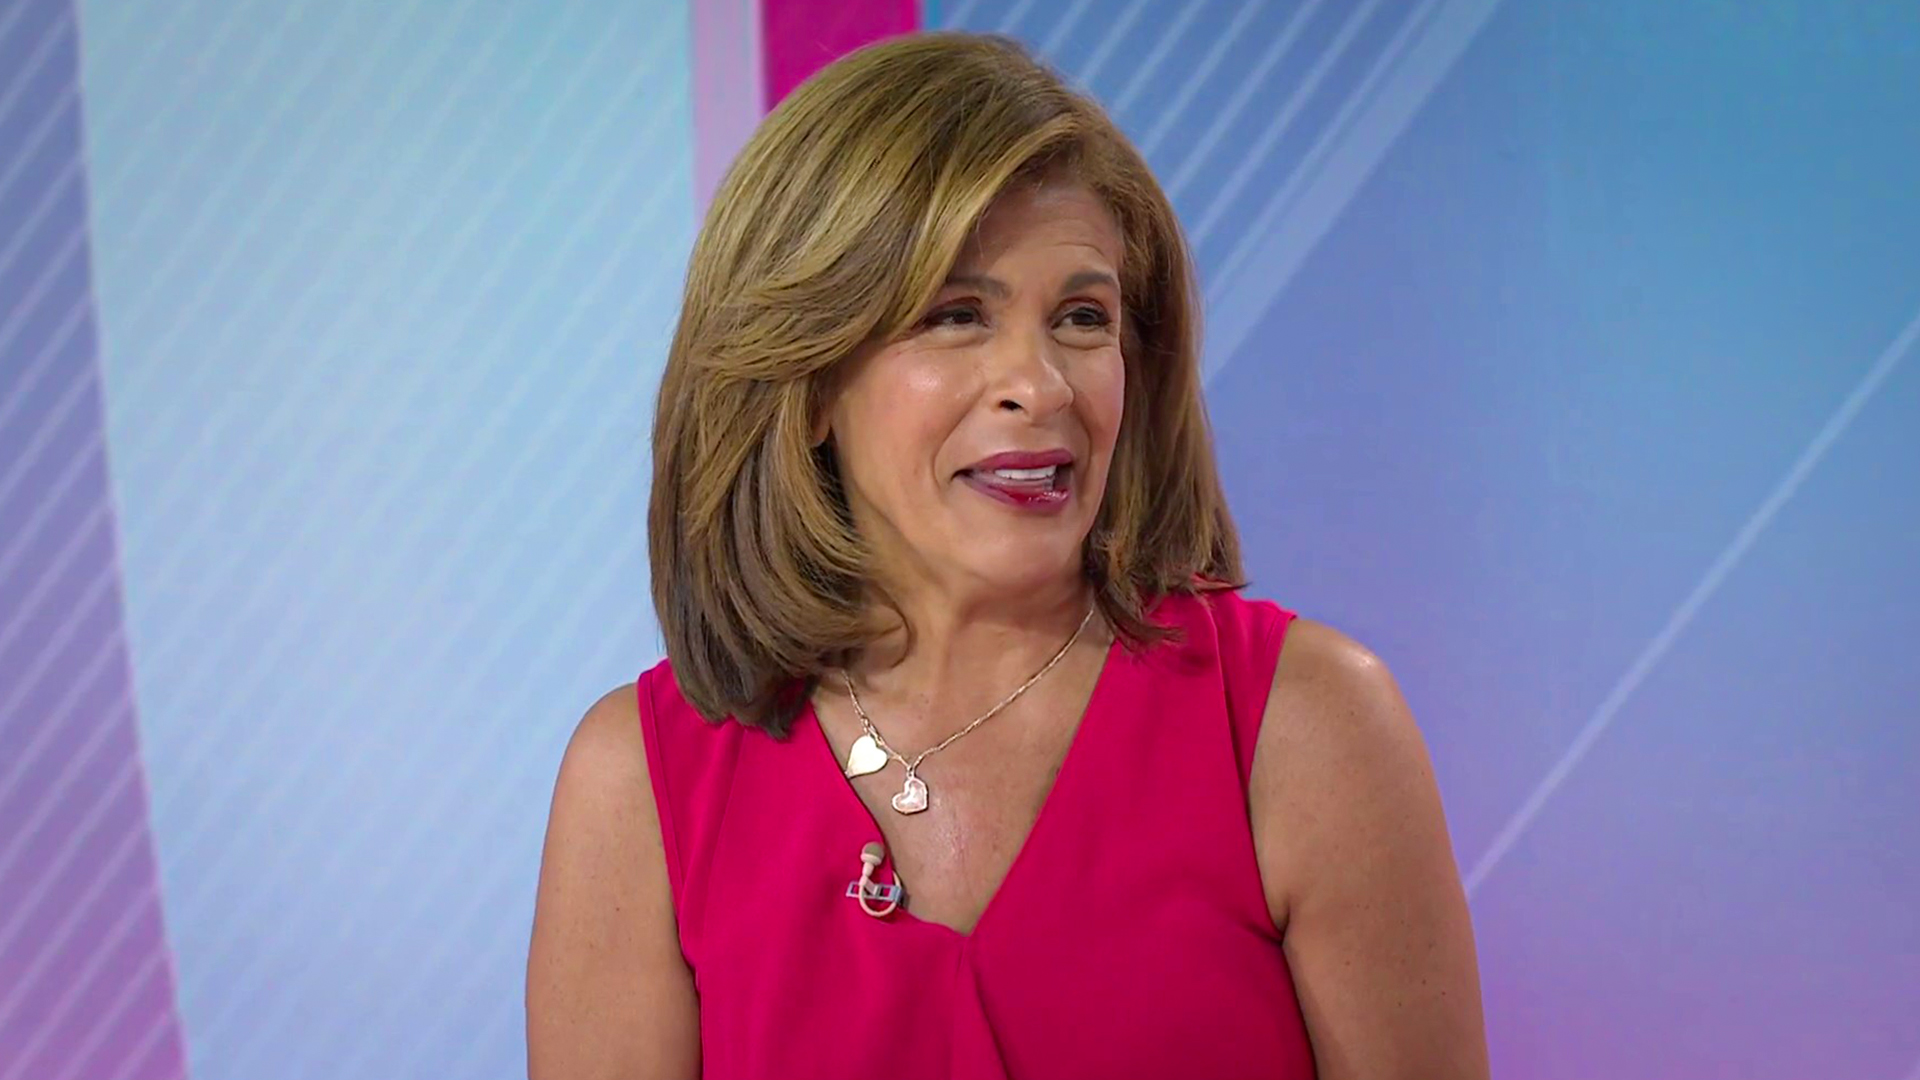 Hoda Kotb gets emotional over moving family out of their first home